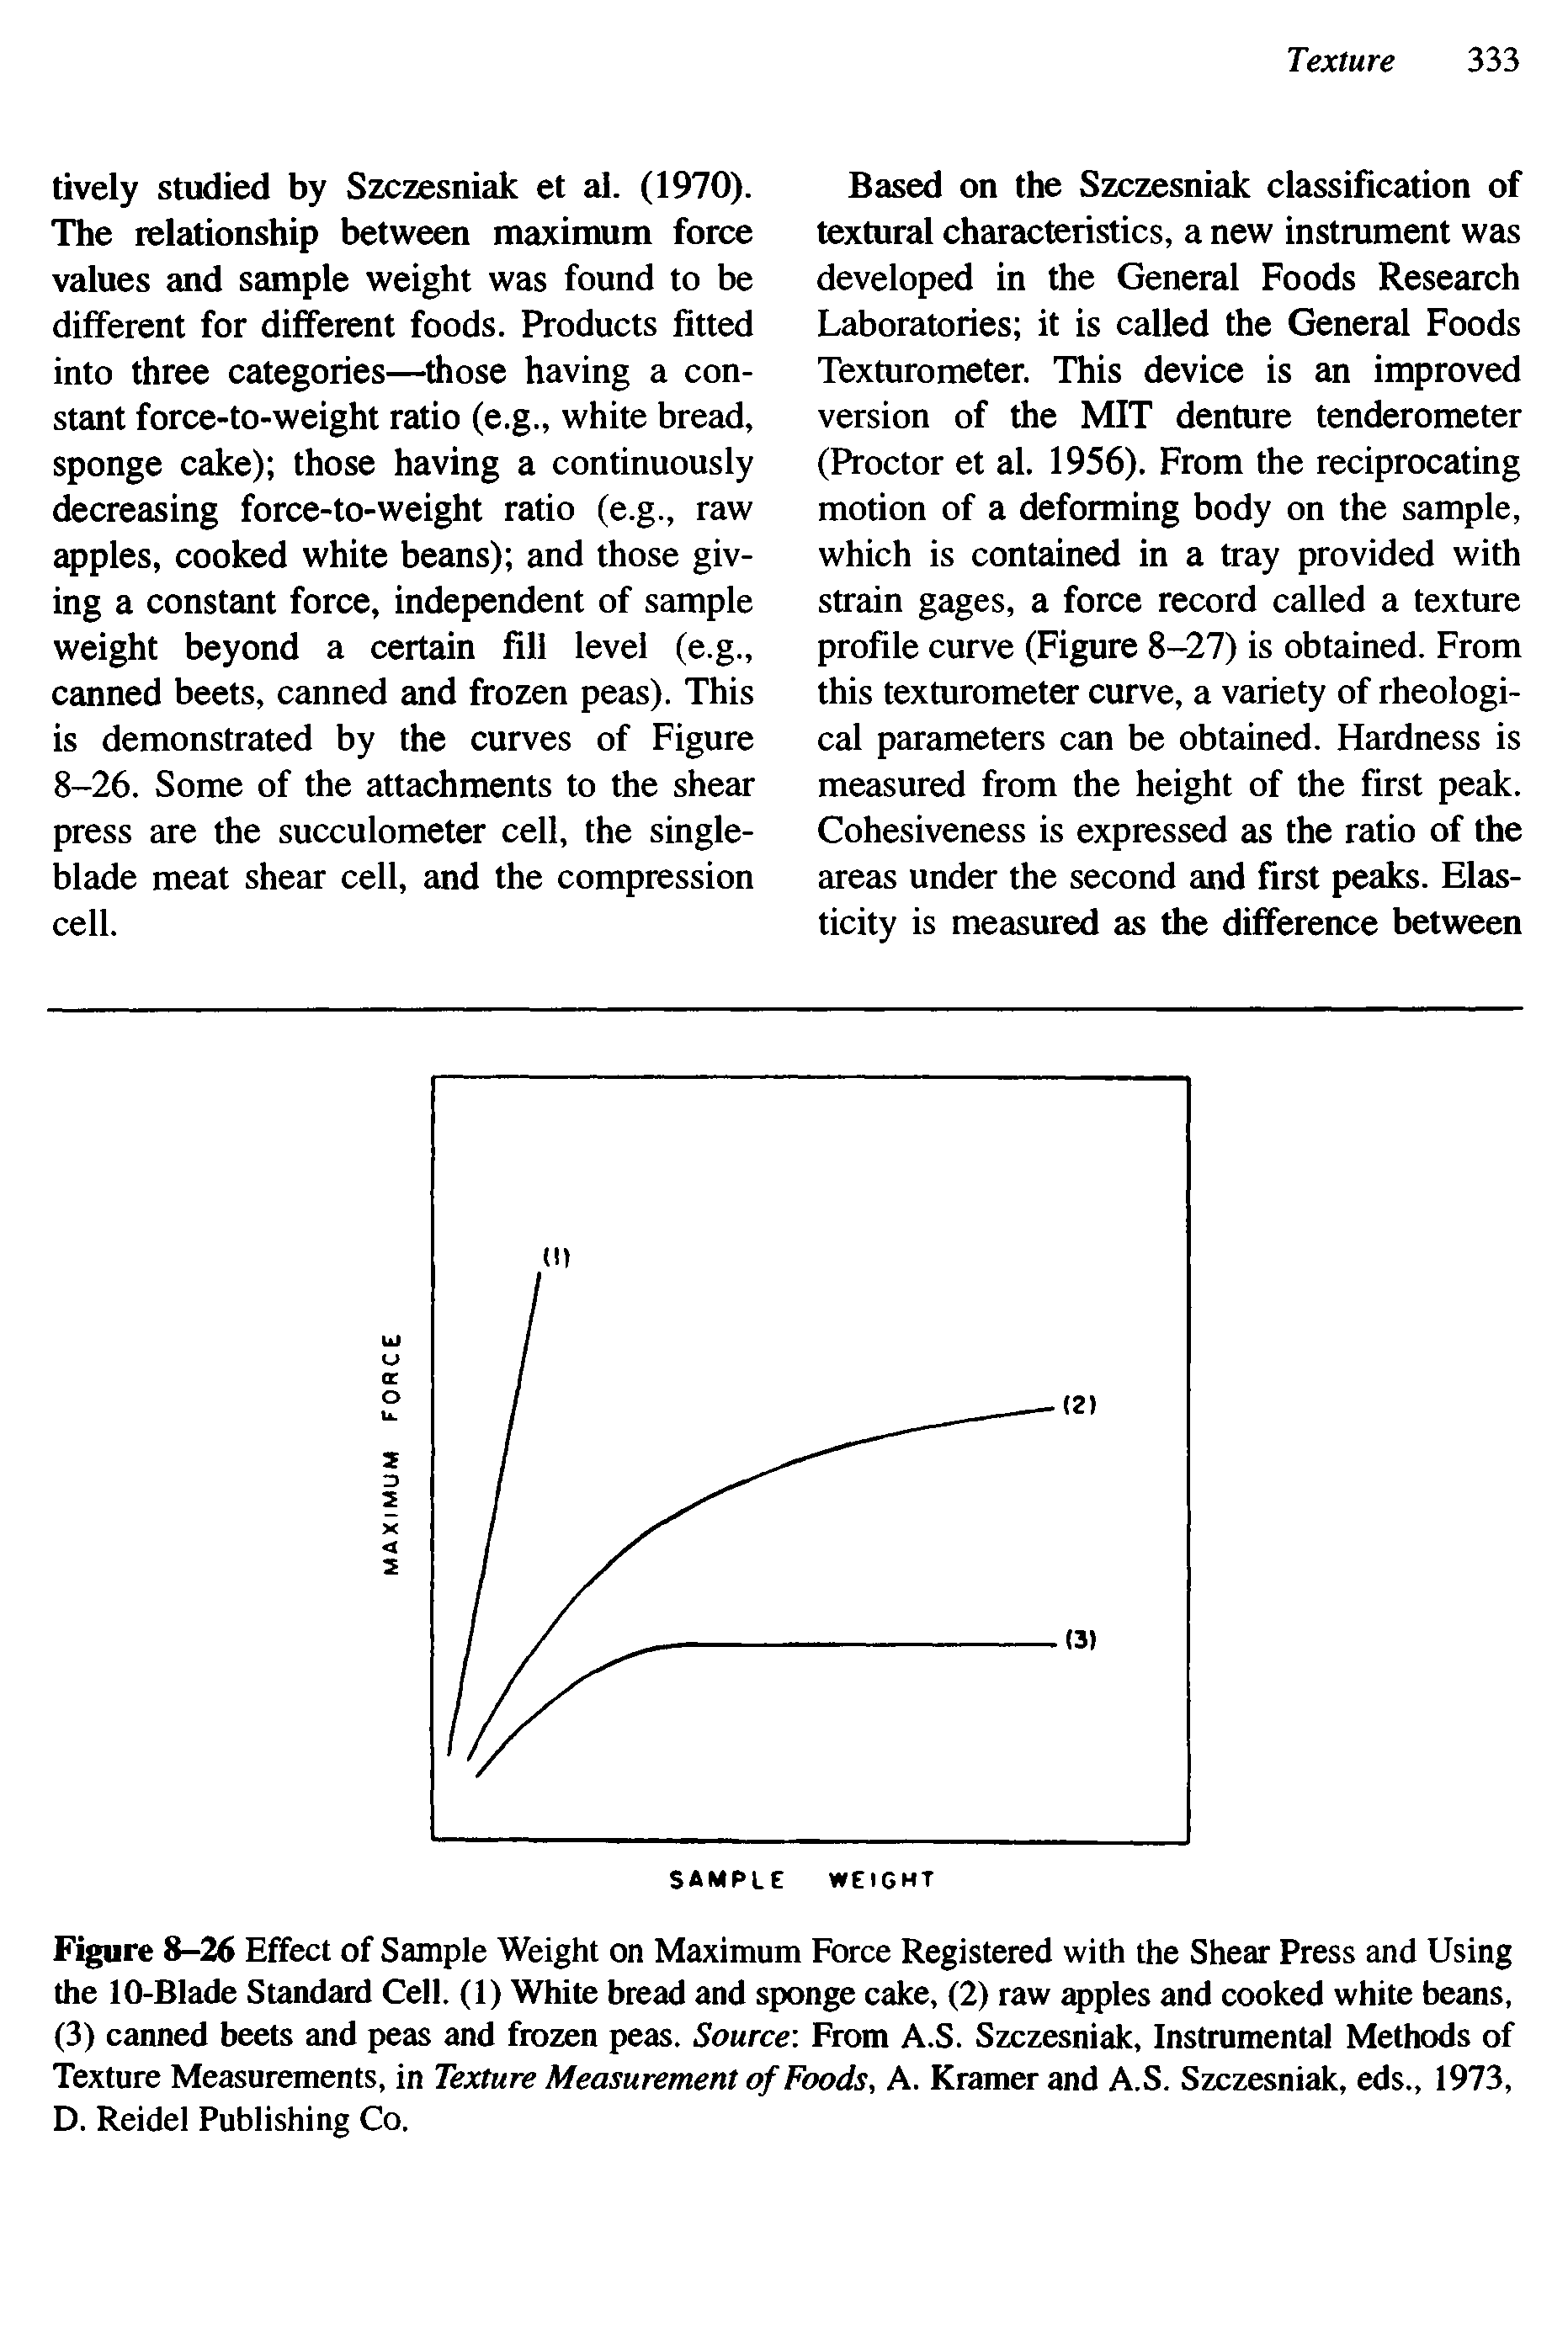 Figure 8-26 Effect of Sample Weight on Maximum Force Registered with the Shear Press and Using the 10-Blade Standard Cell. (1) White bread and sponge cake, (2) raw apples and cooked white beans, (3) canned beets and peas and frozen peas. Source From A.S. Szczesniak, Instrumental Methods of Texture Measurements, in Texture Measurement of Foods, A. Kramer and A.S. Szczesniak, eds., 1973, D. Reidel Publishing Co.